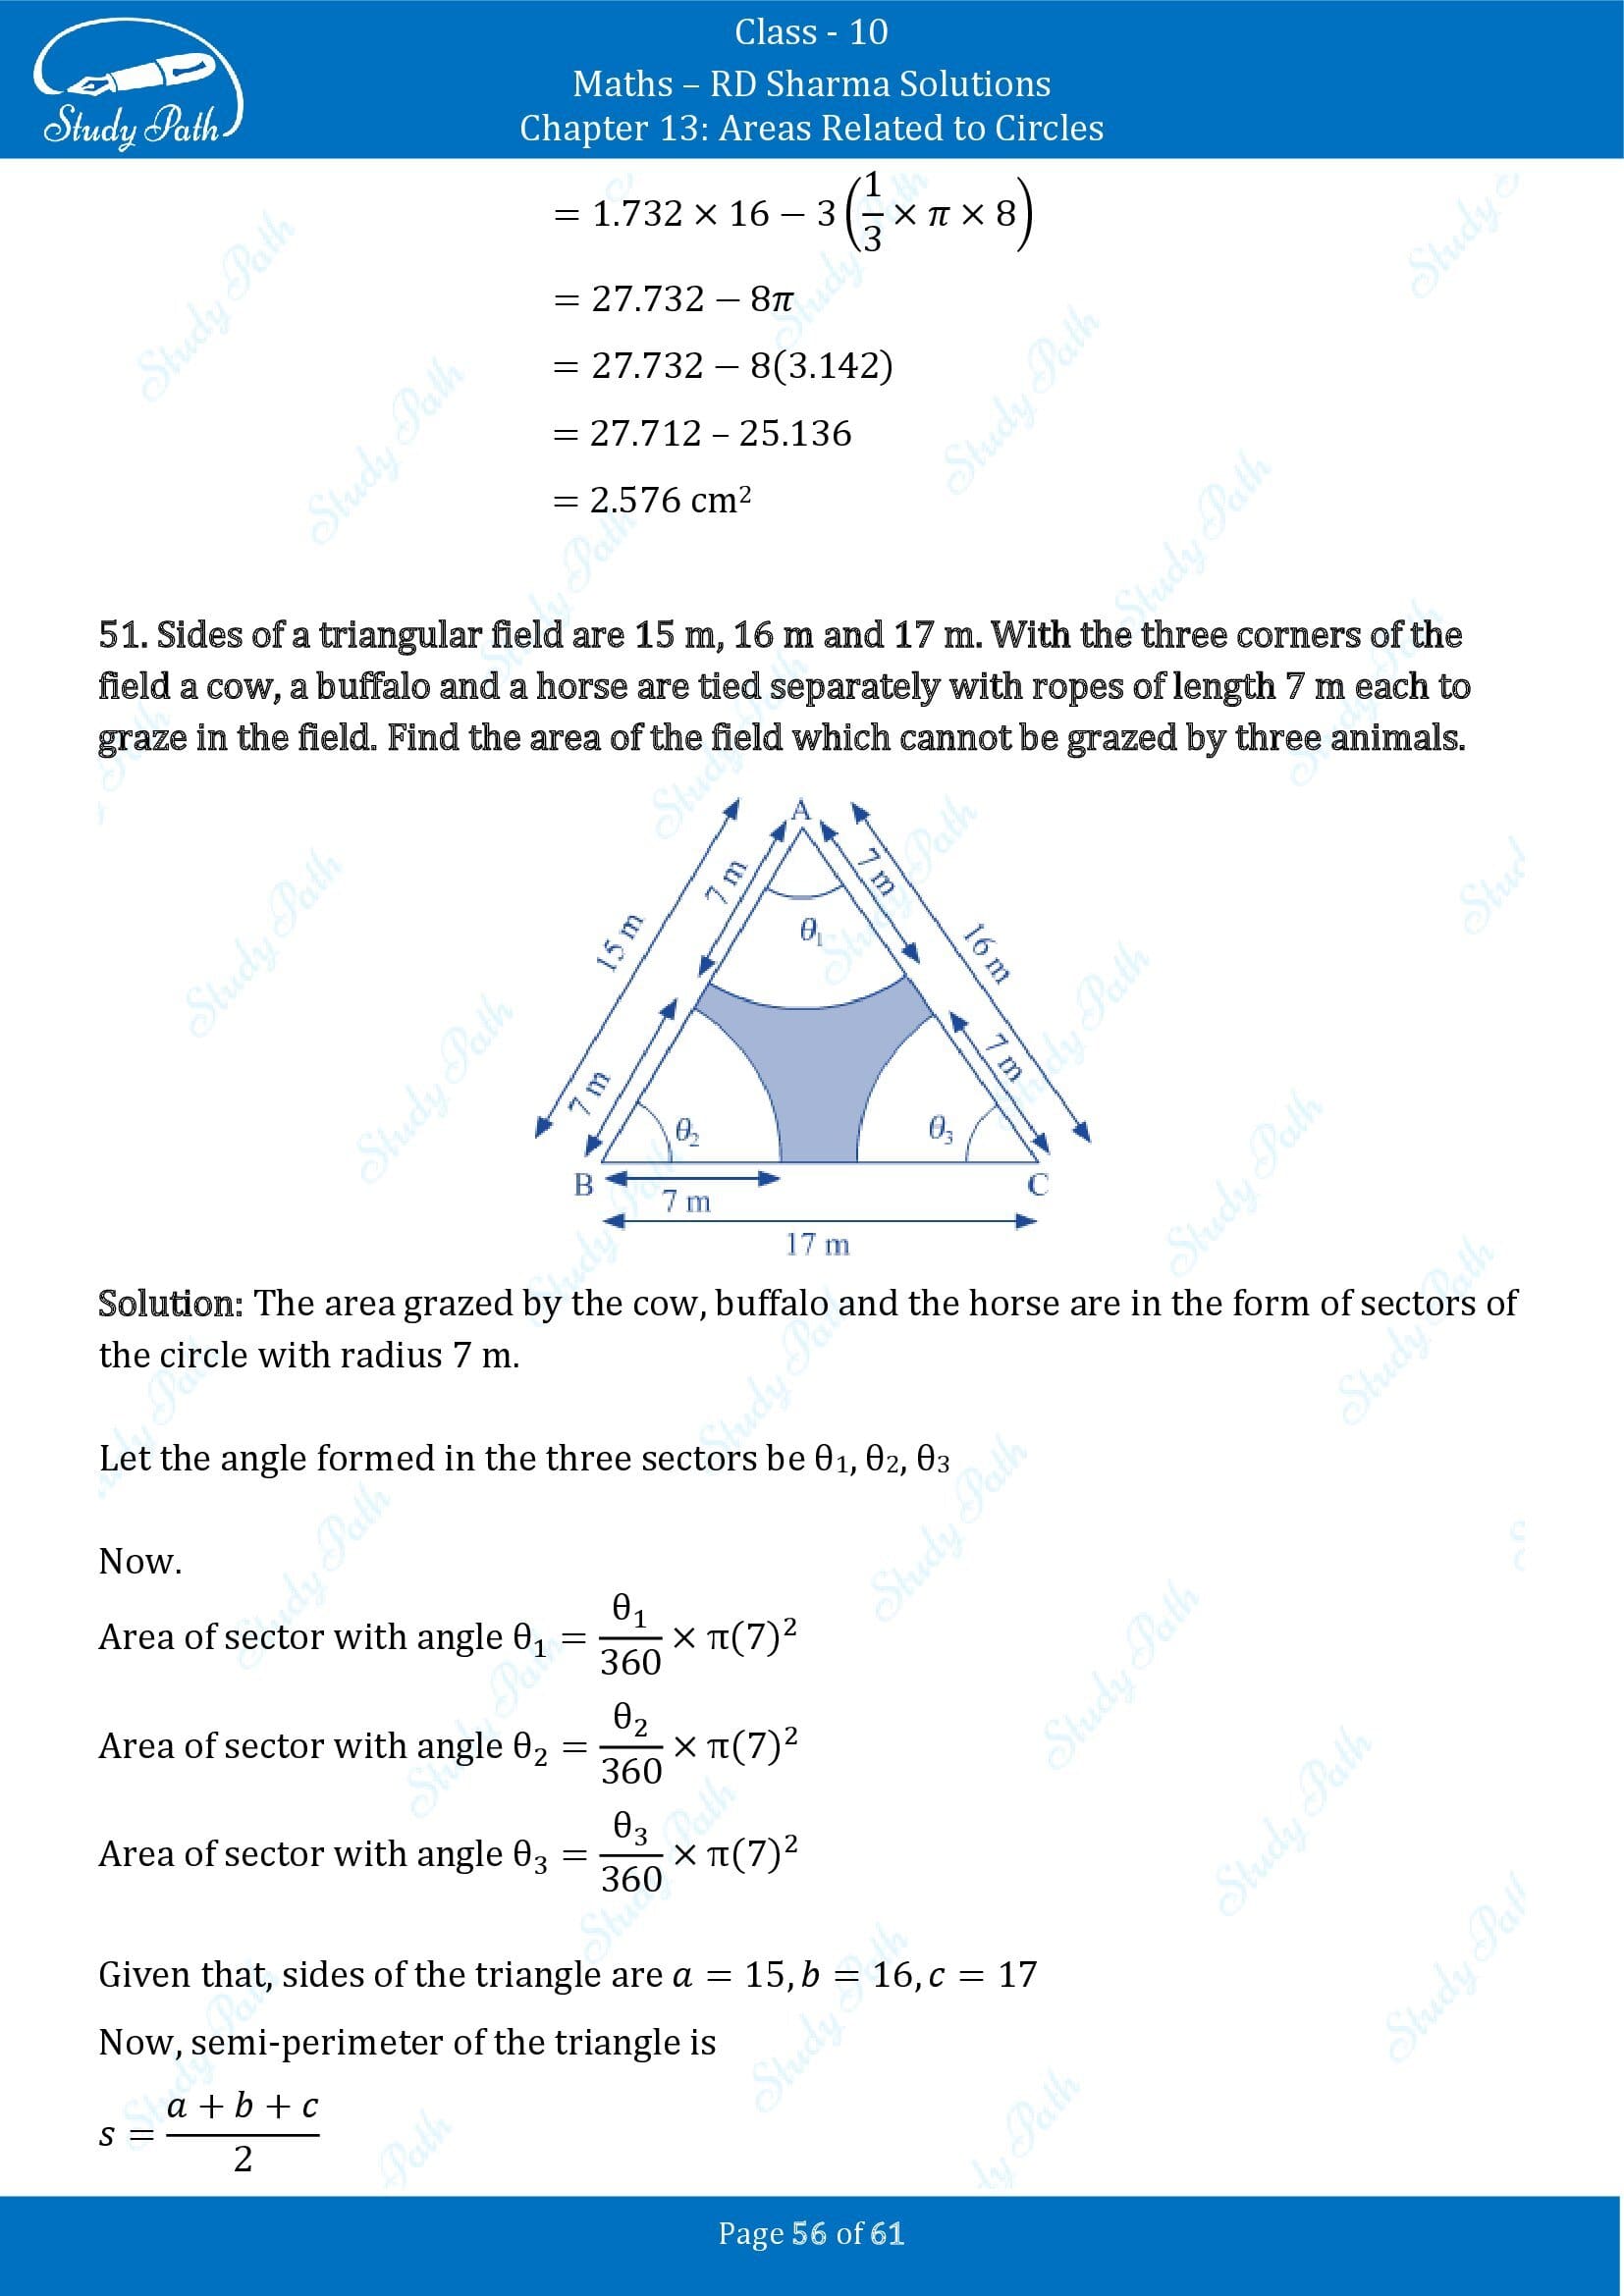 RD Sharma Solutions Class 10 Chapter 13 Areas Related to Circles Exercise 13.4 00056